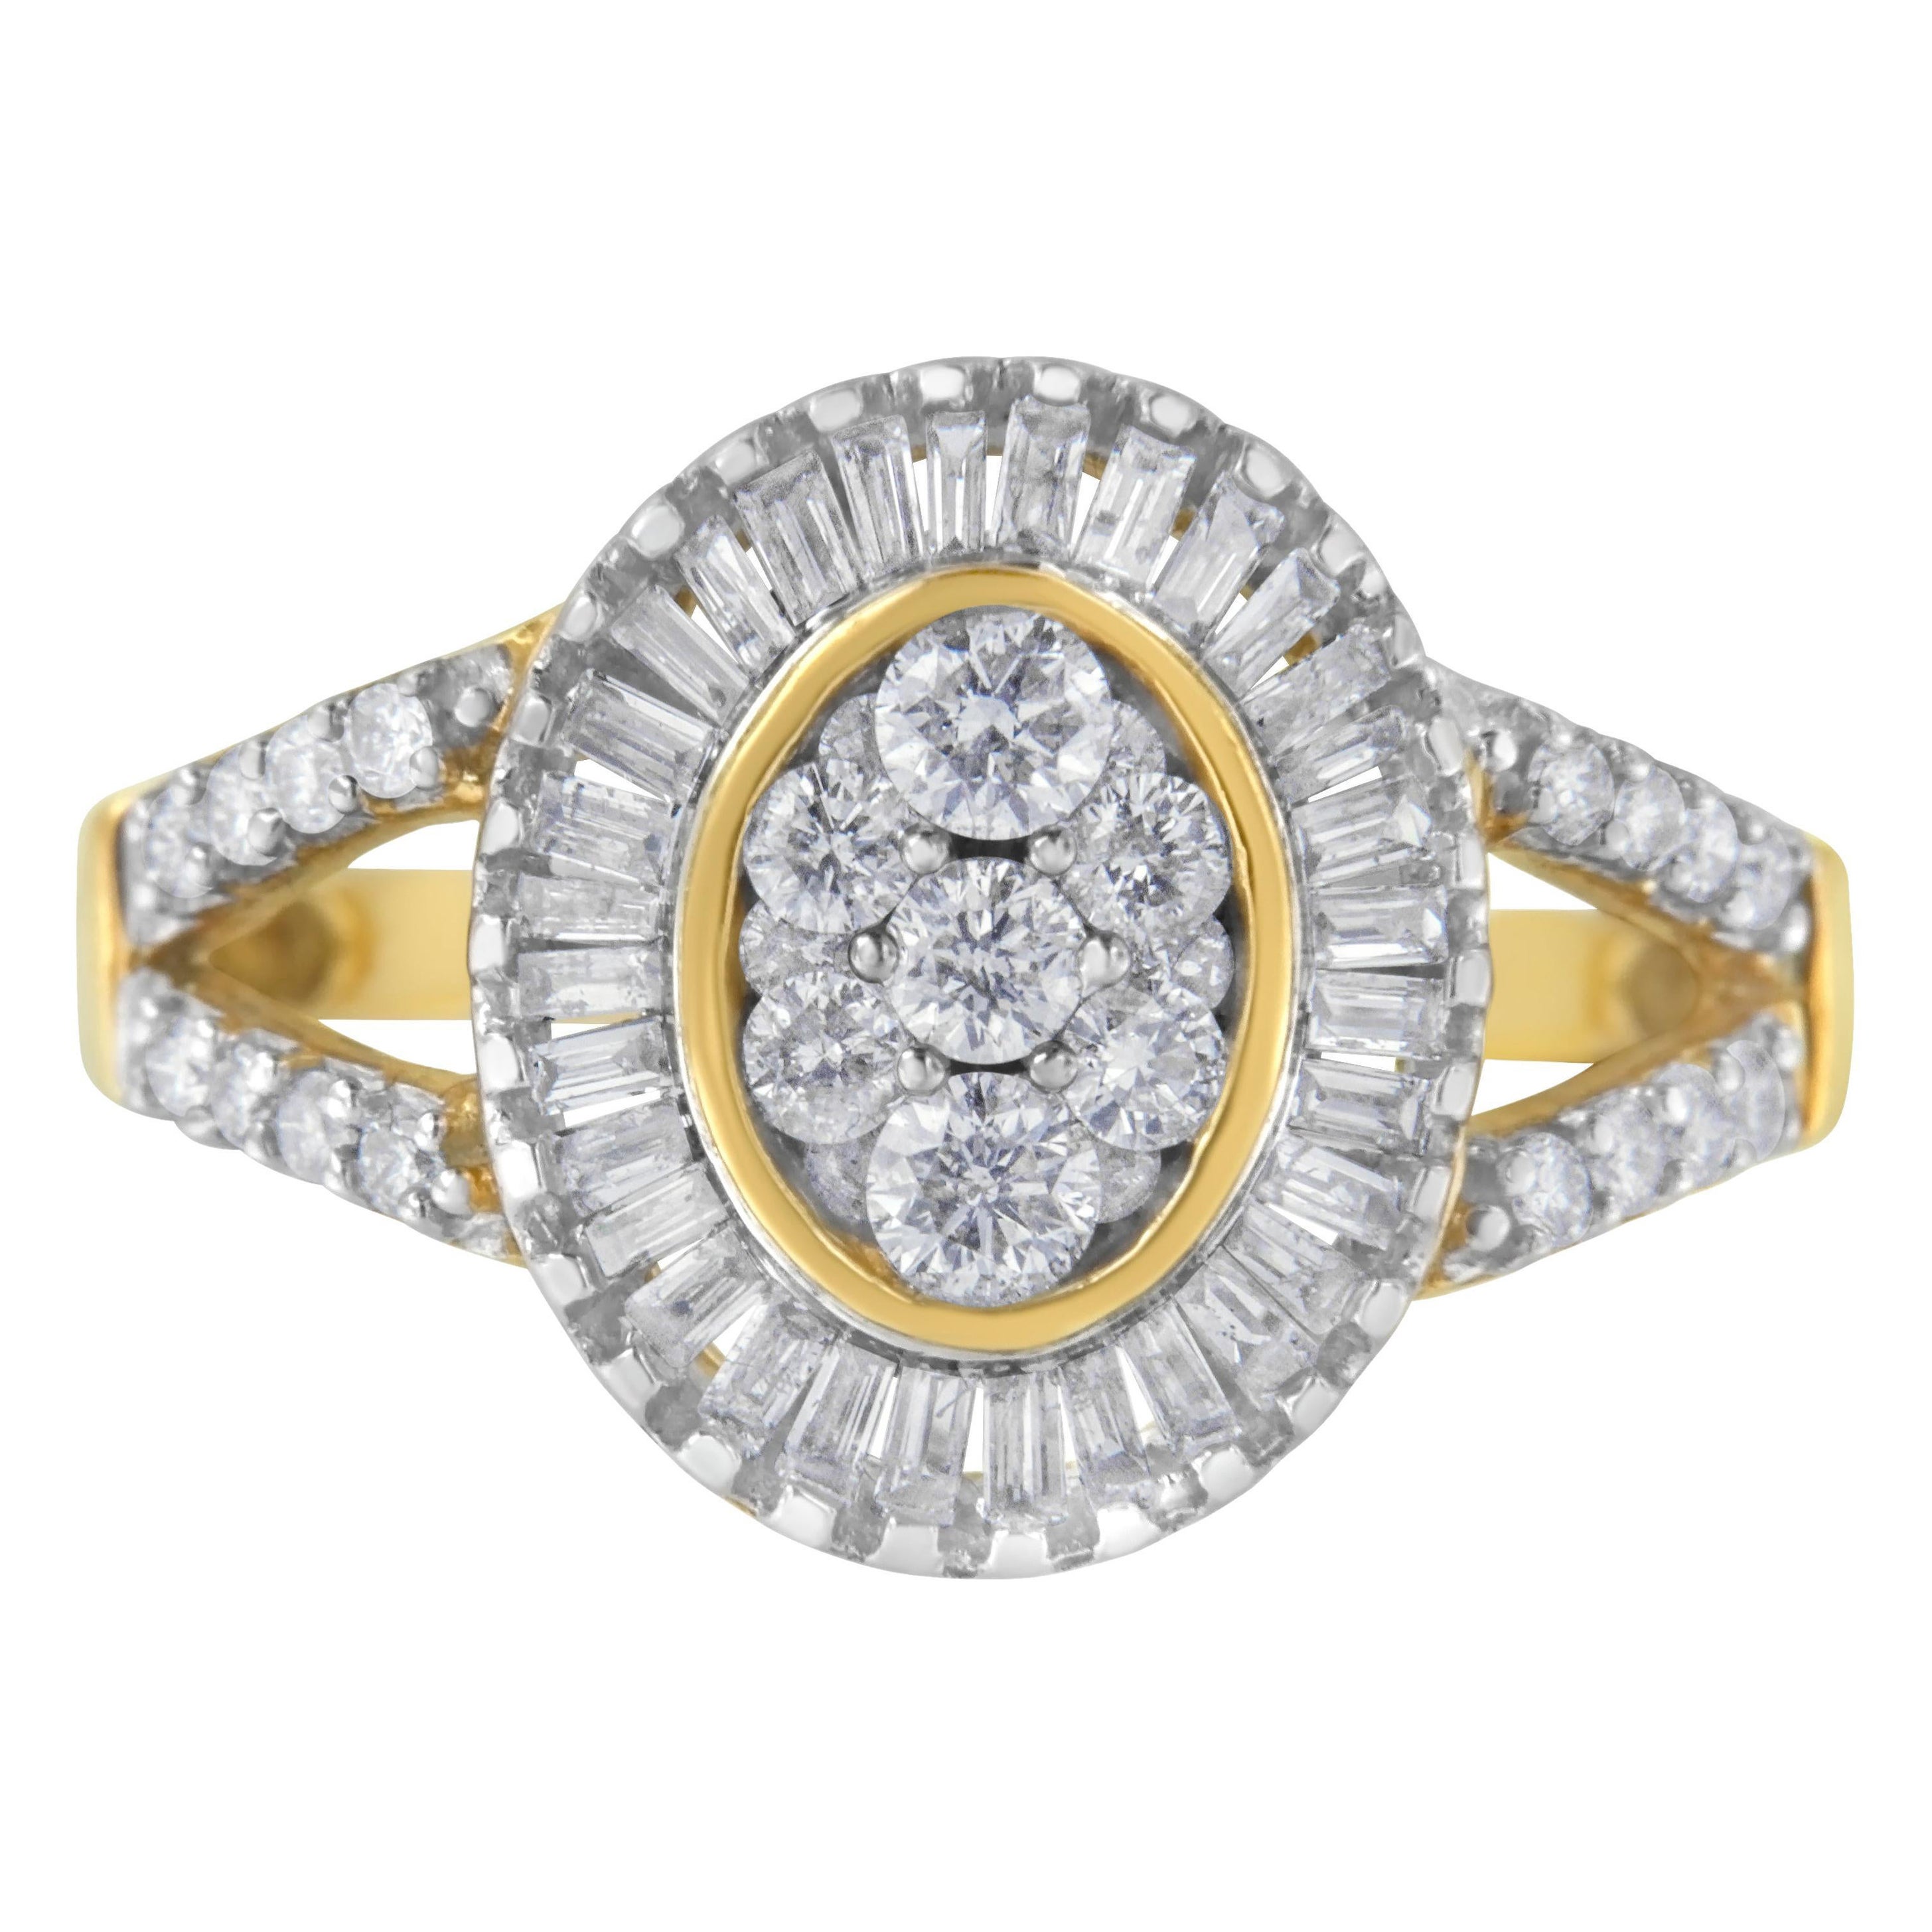 10K Yellow Gold 1.0 Carat Diamond Cocktail Ring For Sale